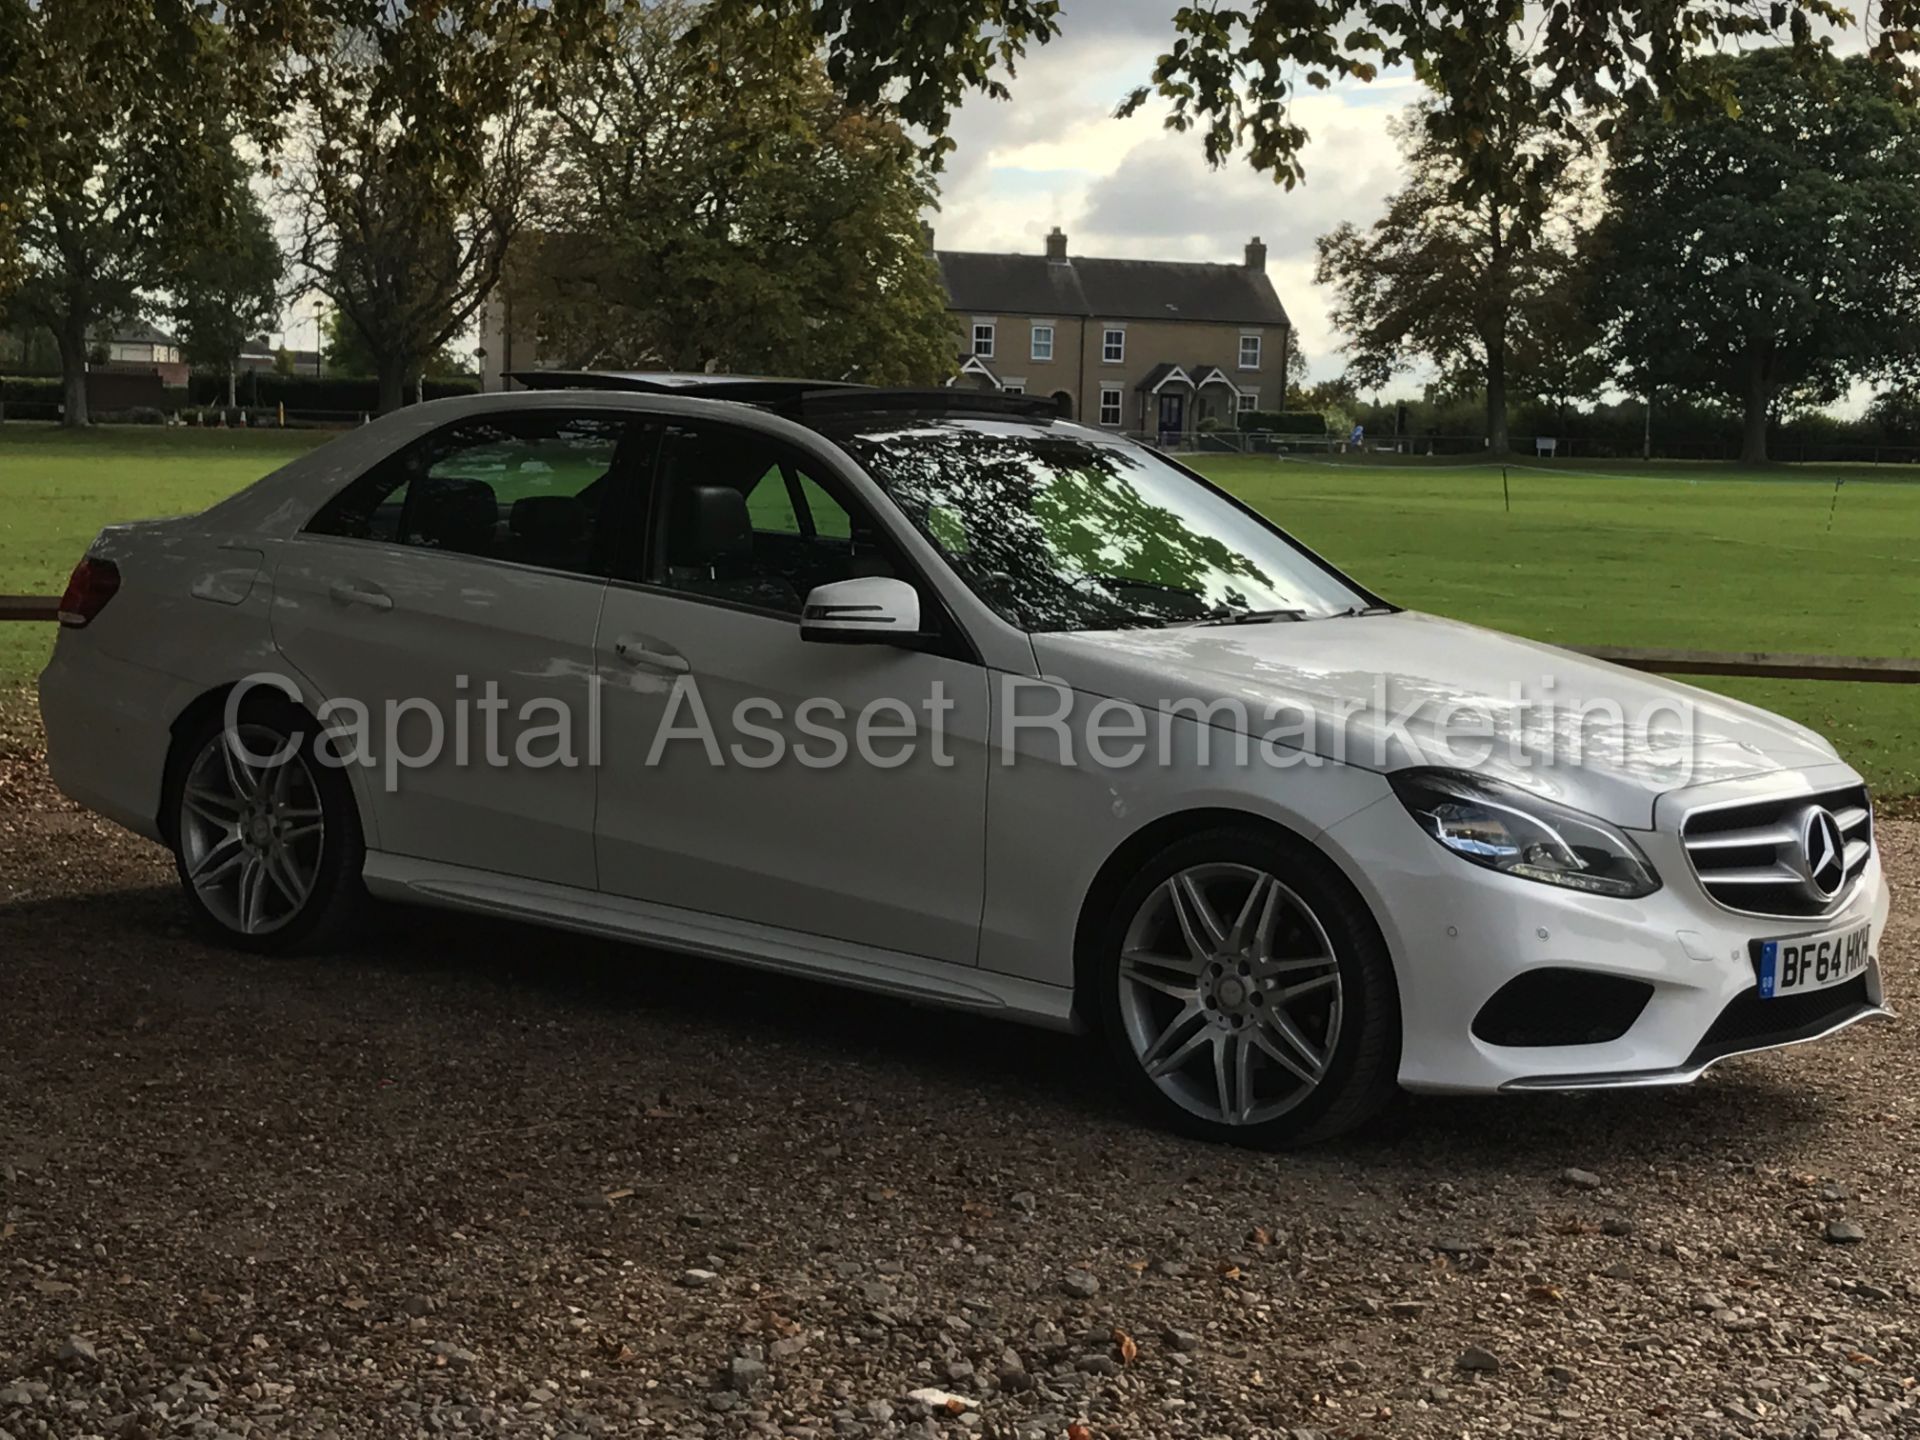 MERCEDES-BENZ E220 'AMG SPORT' (2015 MODEL) 'SALOON - AUTO - PAN ROOF - SAT NAV - LEATHER' *LOOK* - Image 12 of 33